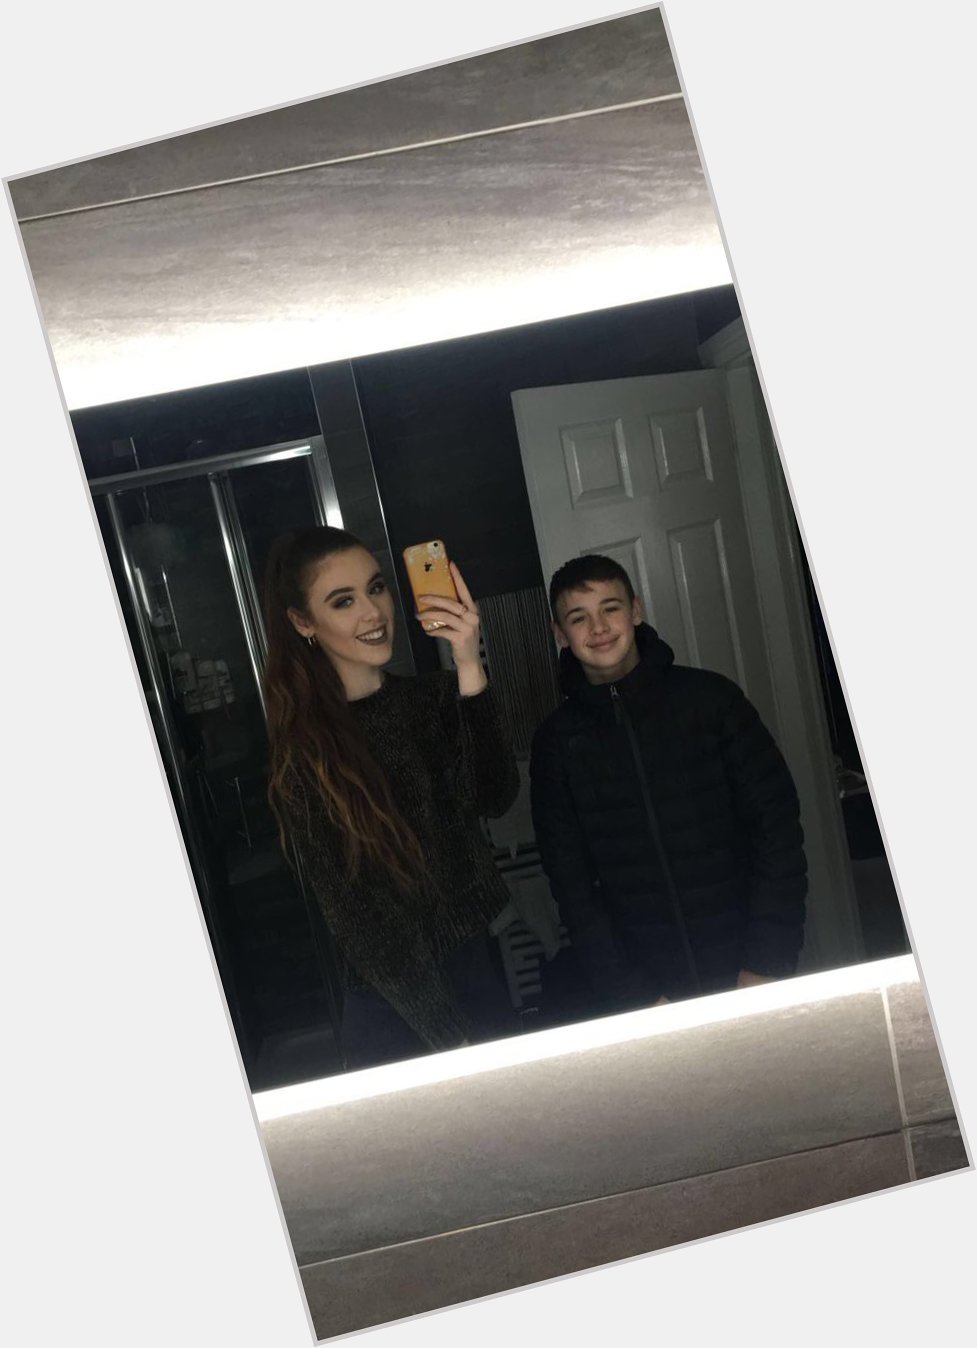 Happy day late bday to my little brother, stop trying to be joe weller pls u weirdo x 